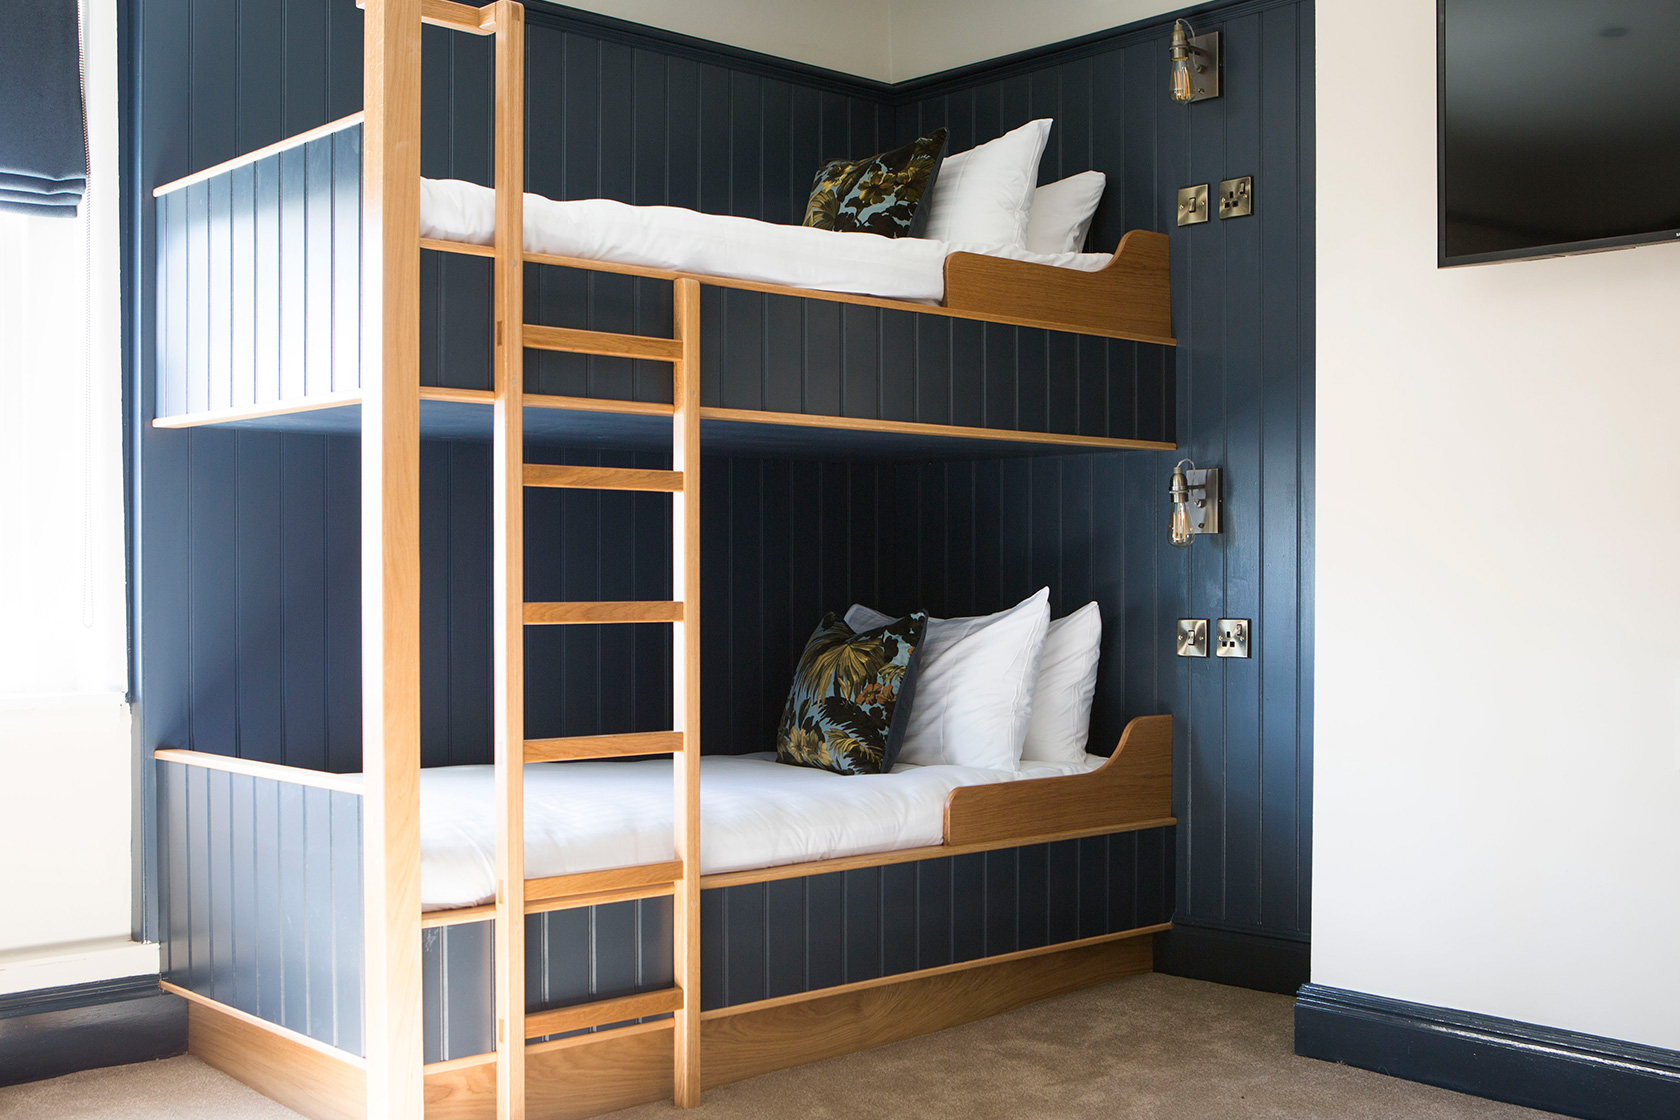 Our bunk beds are perfect for kids or just a group of friends looking for a great bedroom near Wrexham